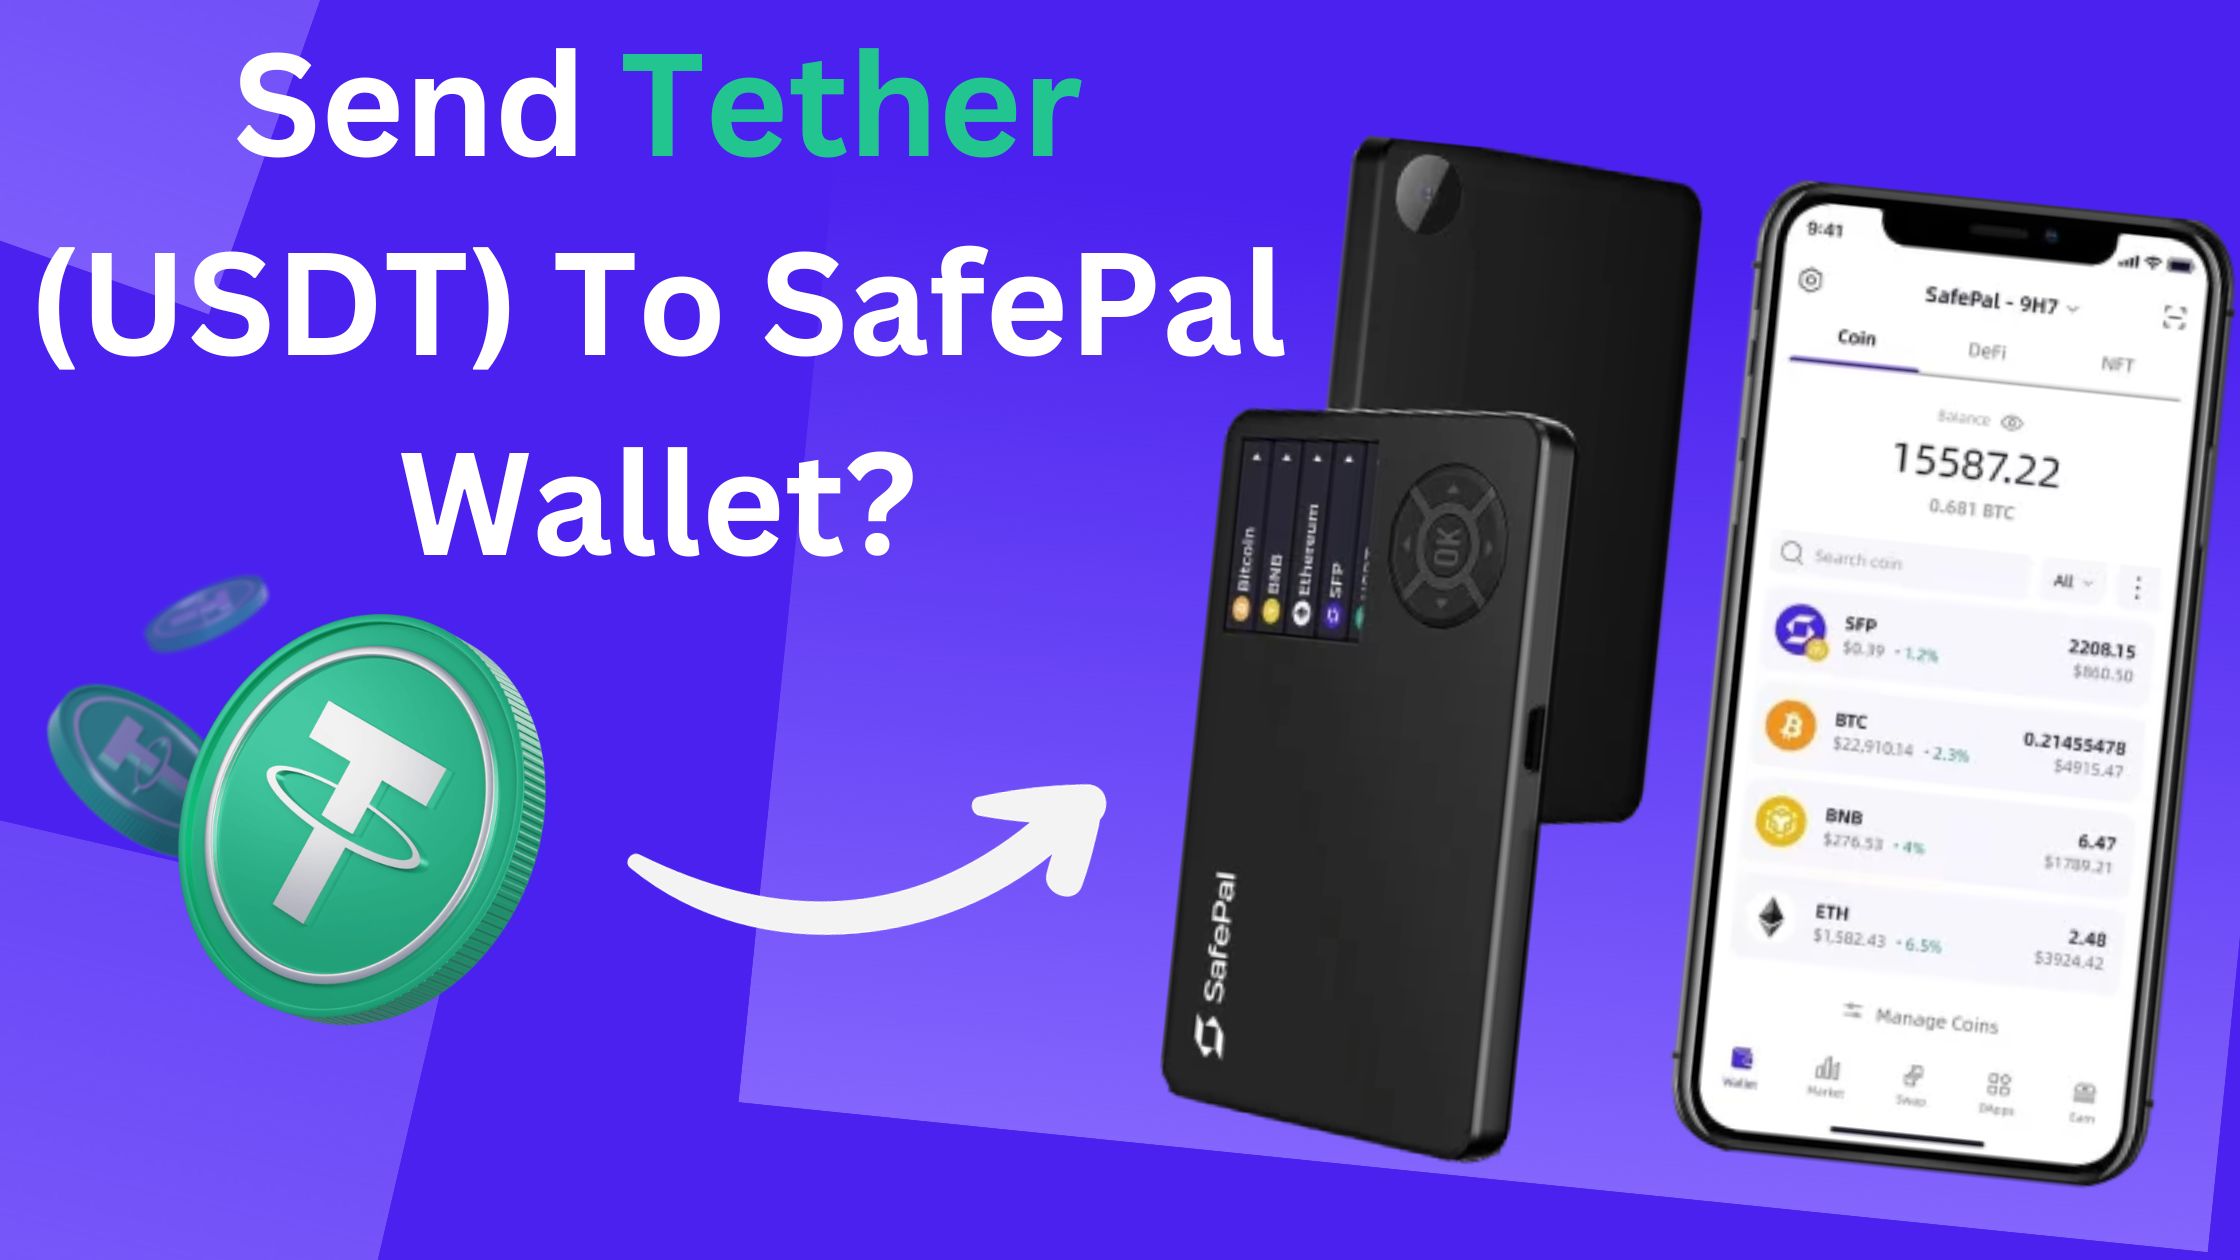 Guide: How To Send Tether (USDT) To SafePal Wallet?